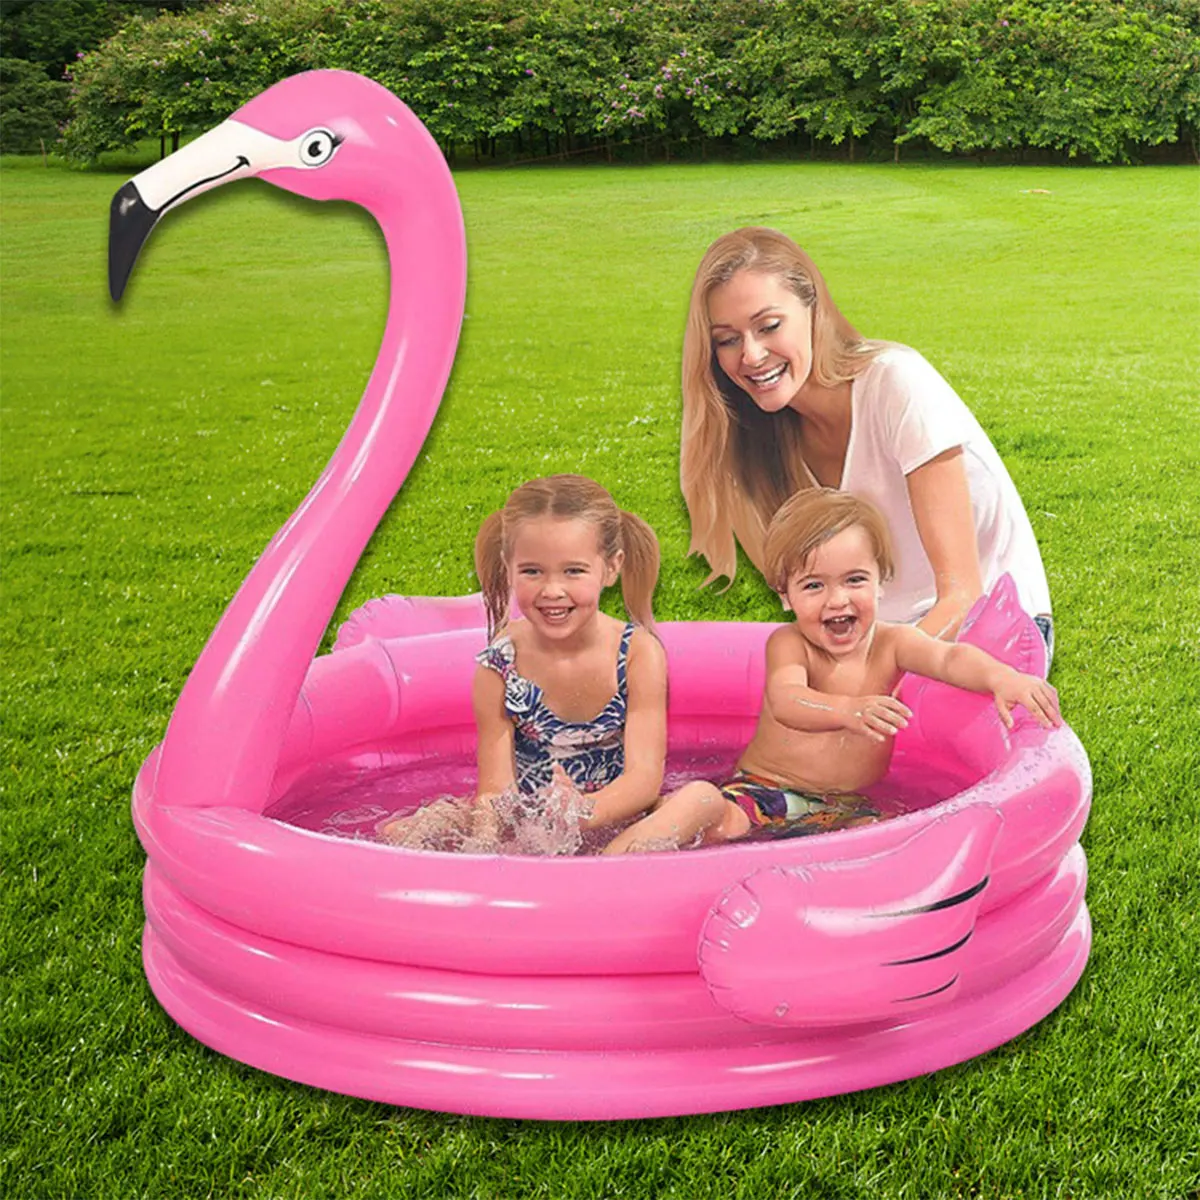 Children Inflatable Round Three-Ring Flamingo Pool Foldable Portable Outdoor Paddling Pool Ocean Ball Fence Playroom Decoration